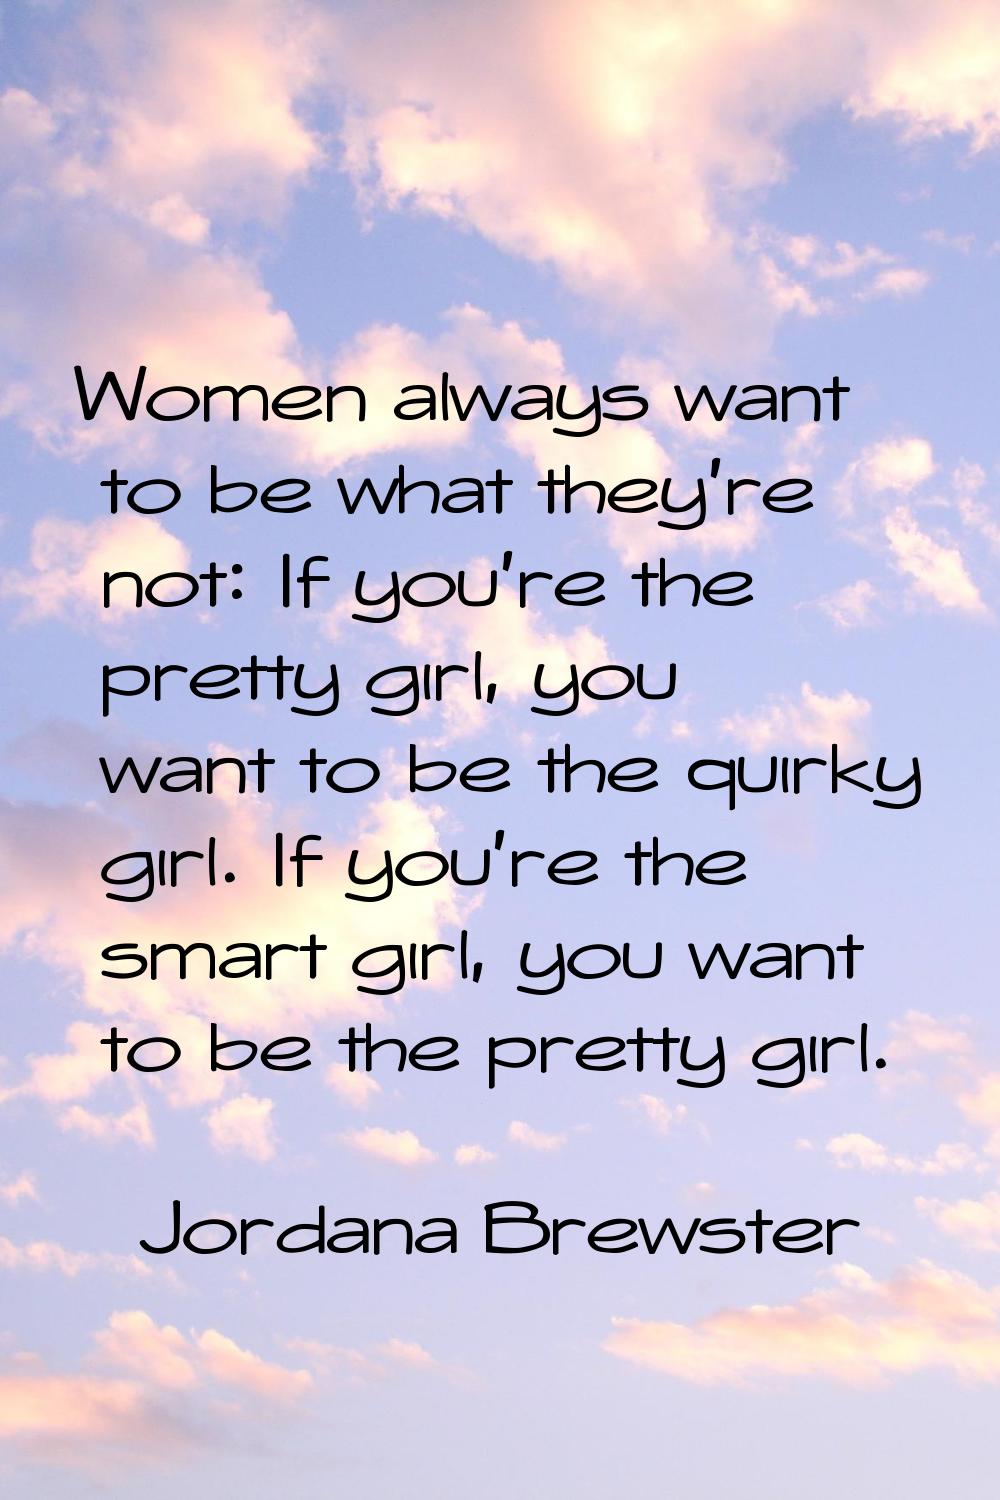 Women always want to be what they're not: If you're the pretty girl, you want to be the quirky girl